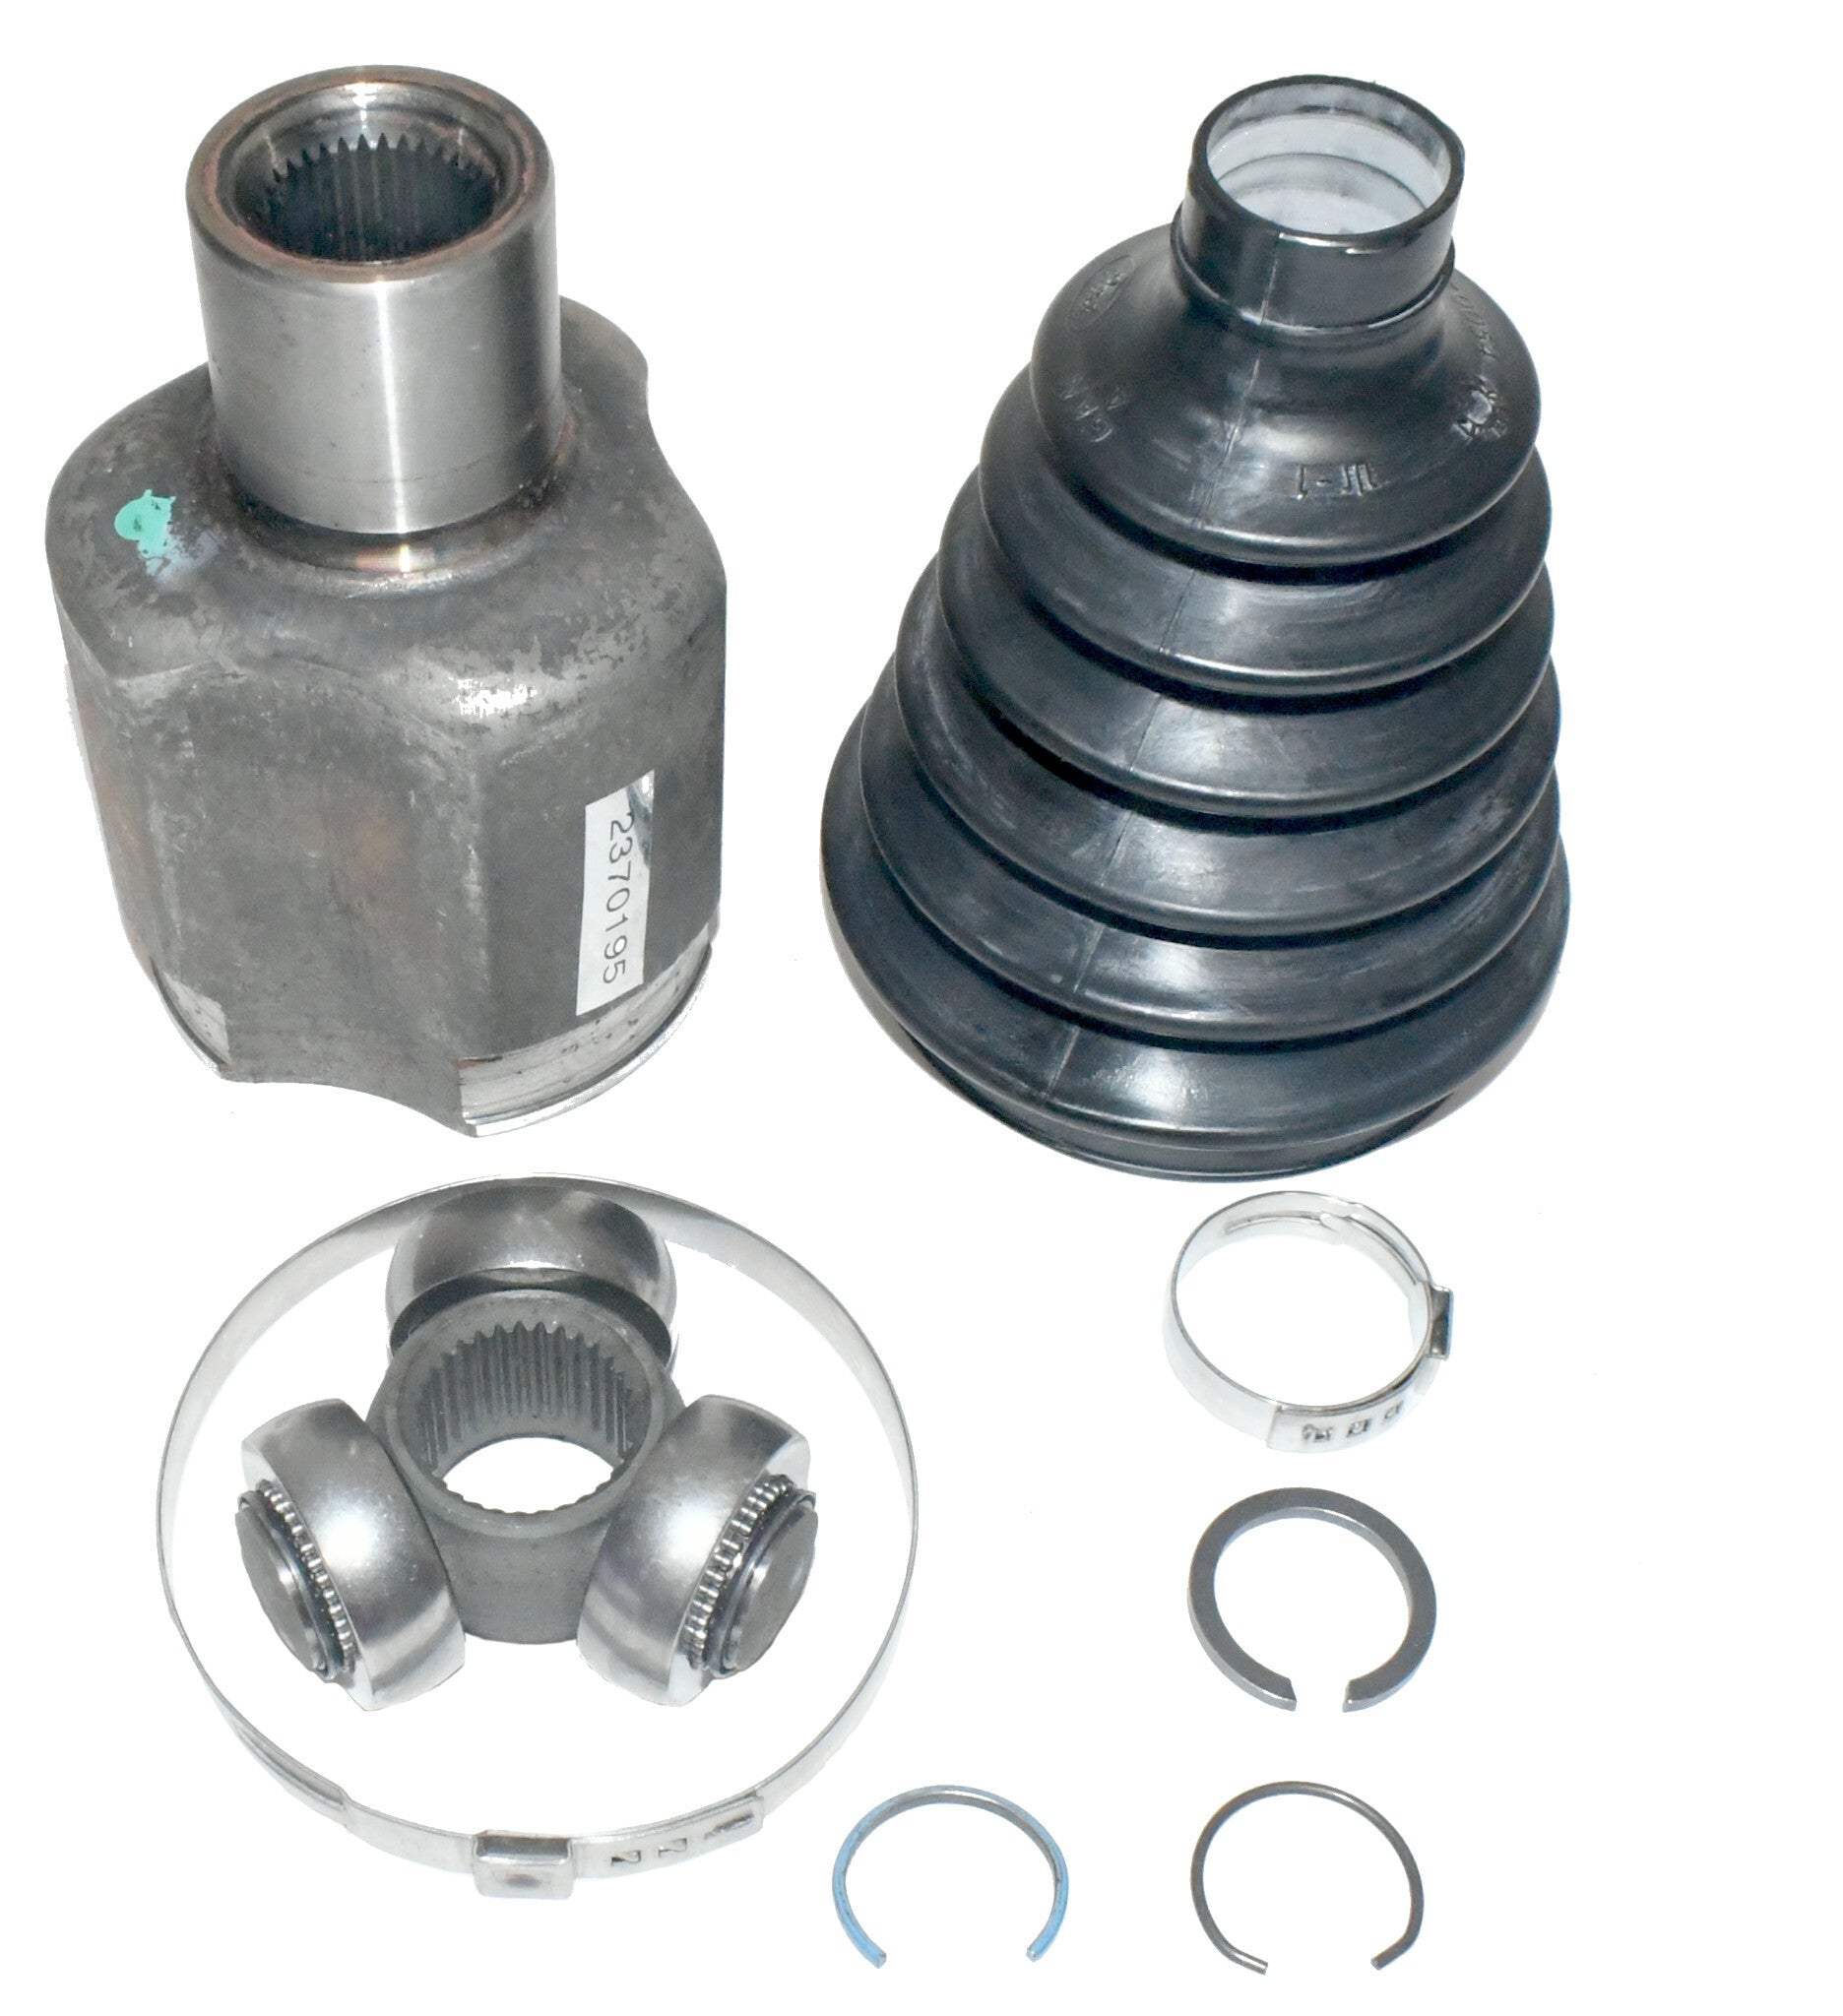 New CV joint kit for 1995 Windstar from Ford TX-267 F58Z-3B414-A-1